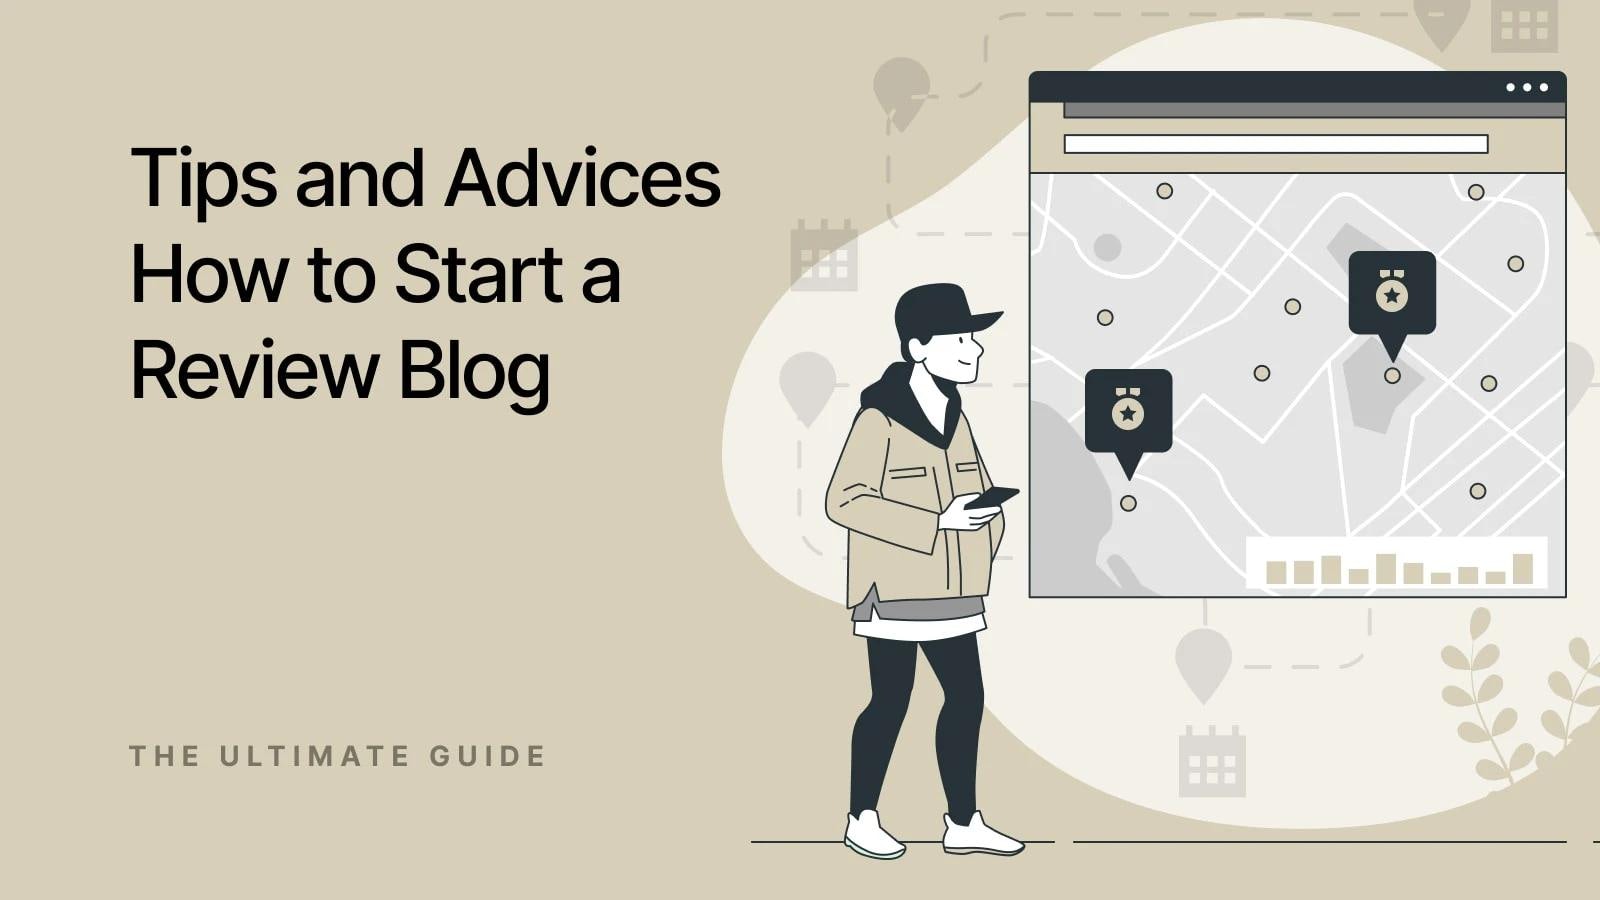 How to Start a Review Blog